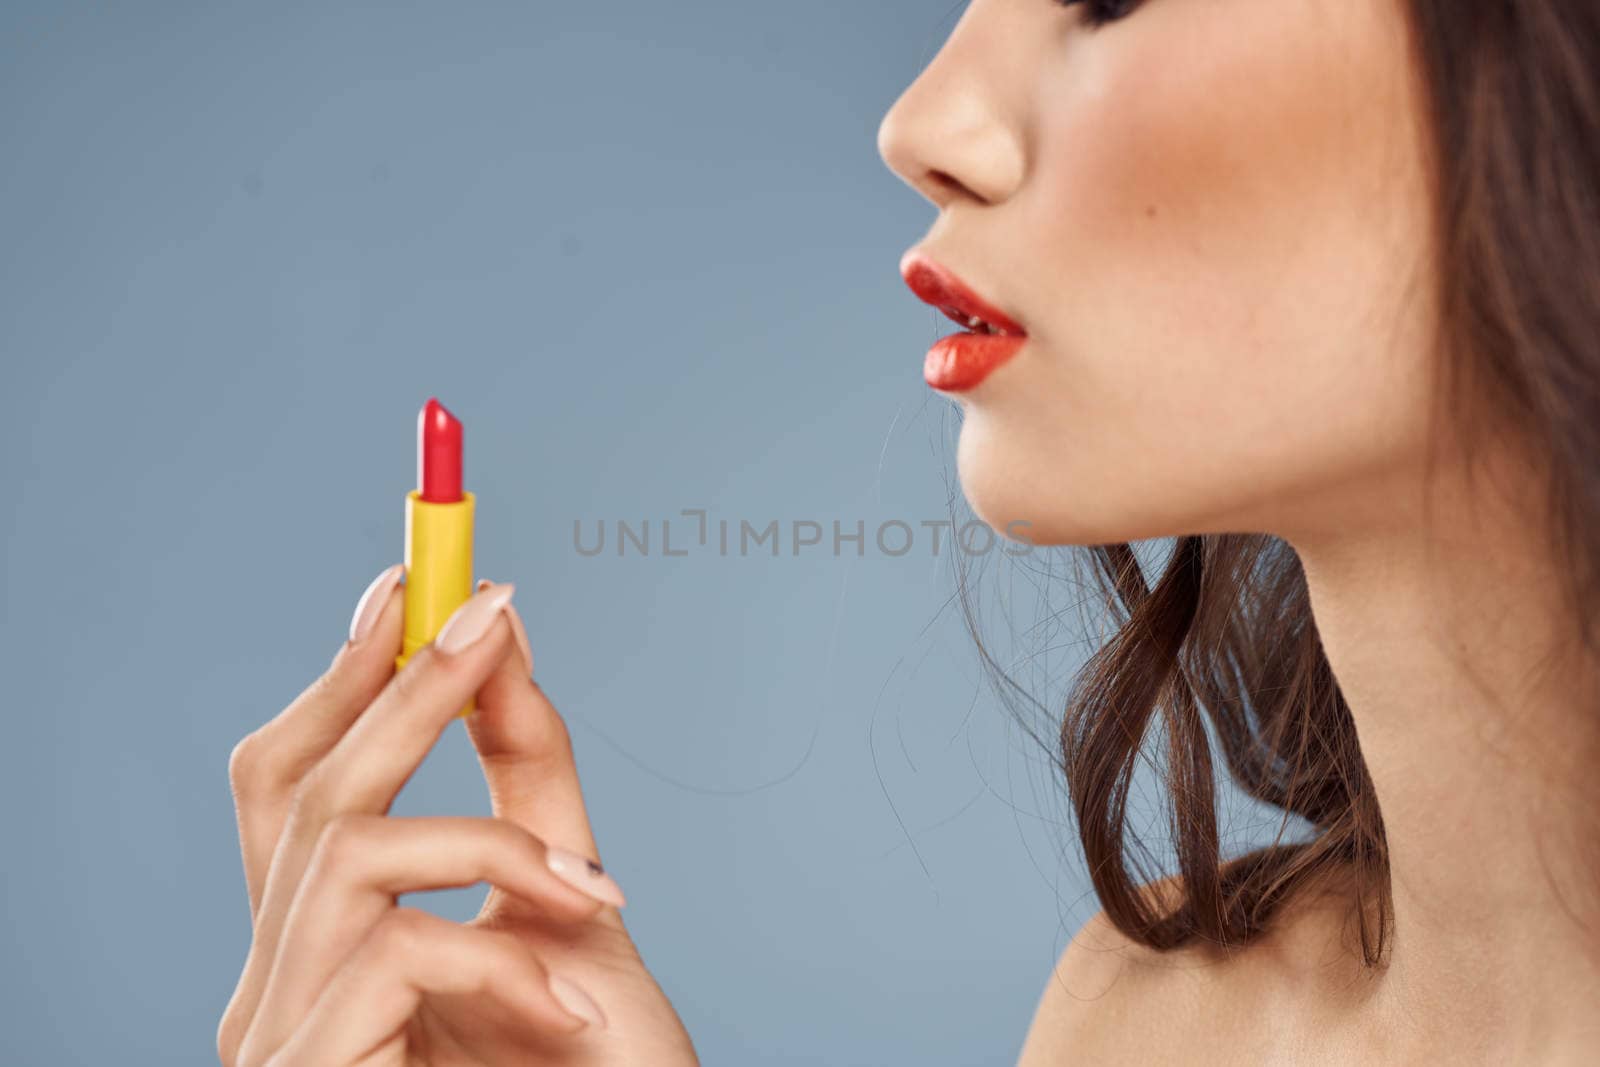 Woman with lipstick on a gray background brunette makeup with eye shadow on the eyelids. High quality photo